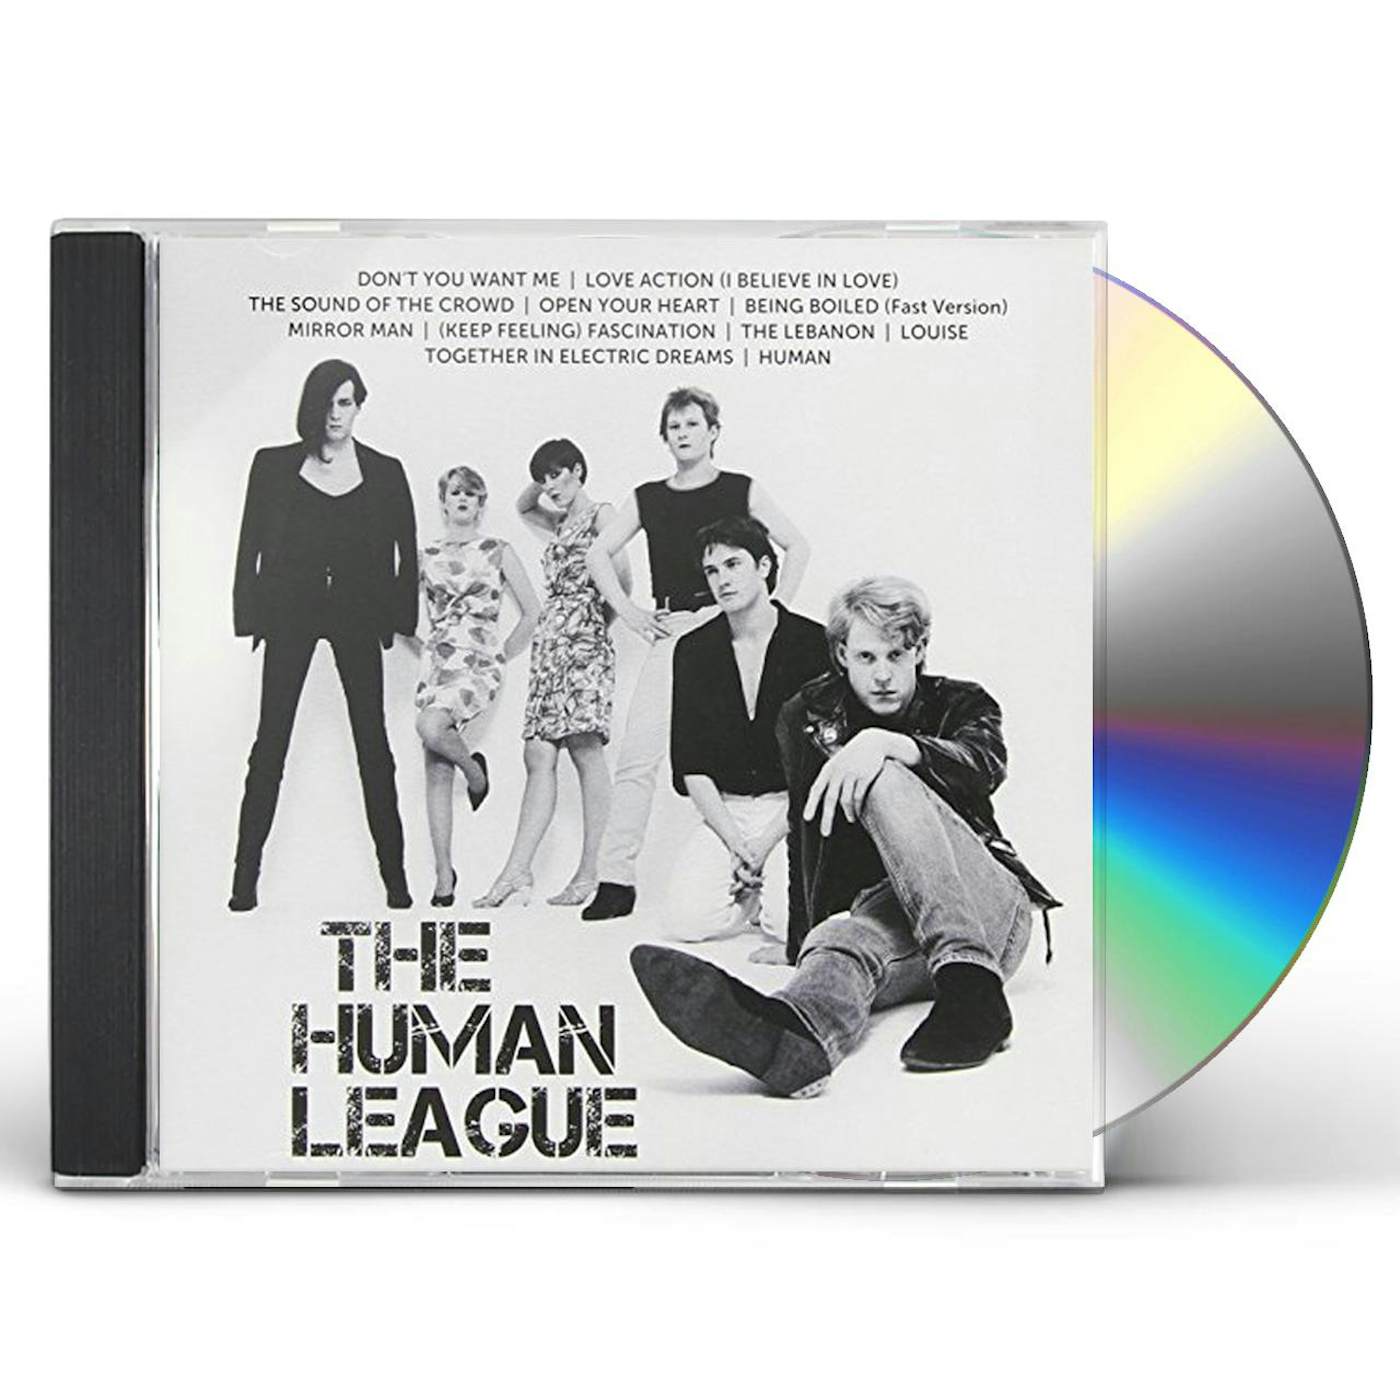 The Human League ICON CD